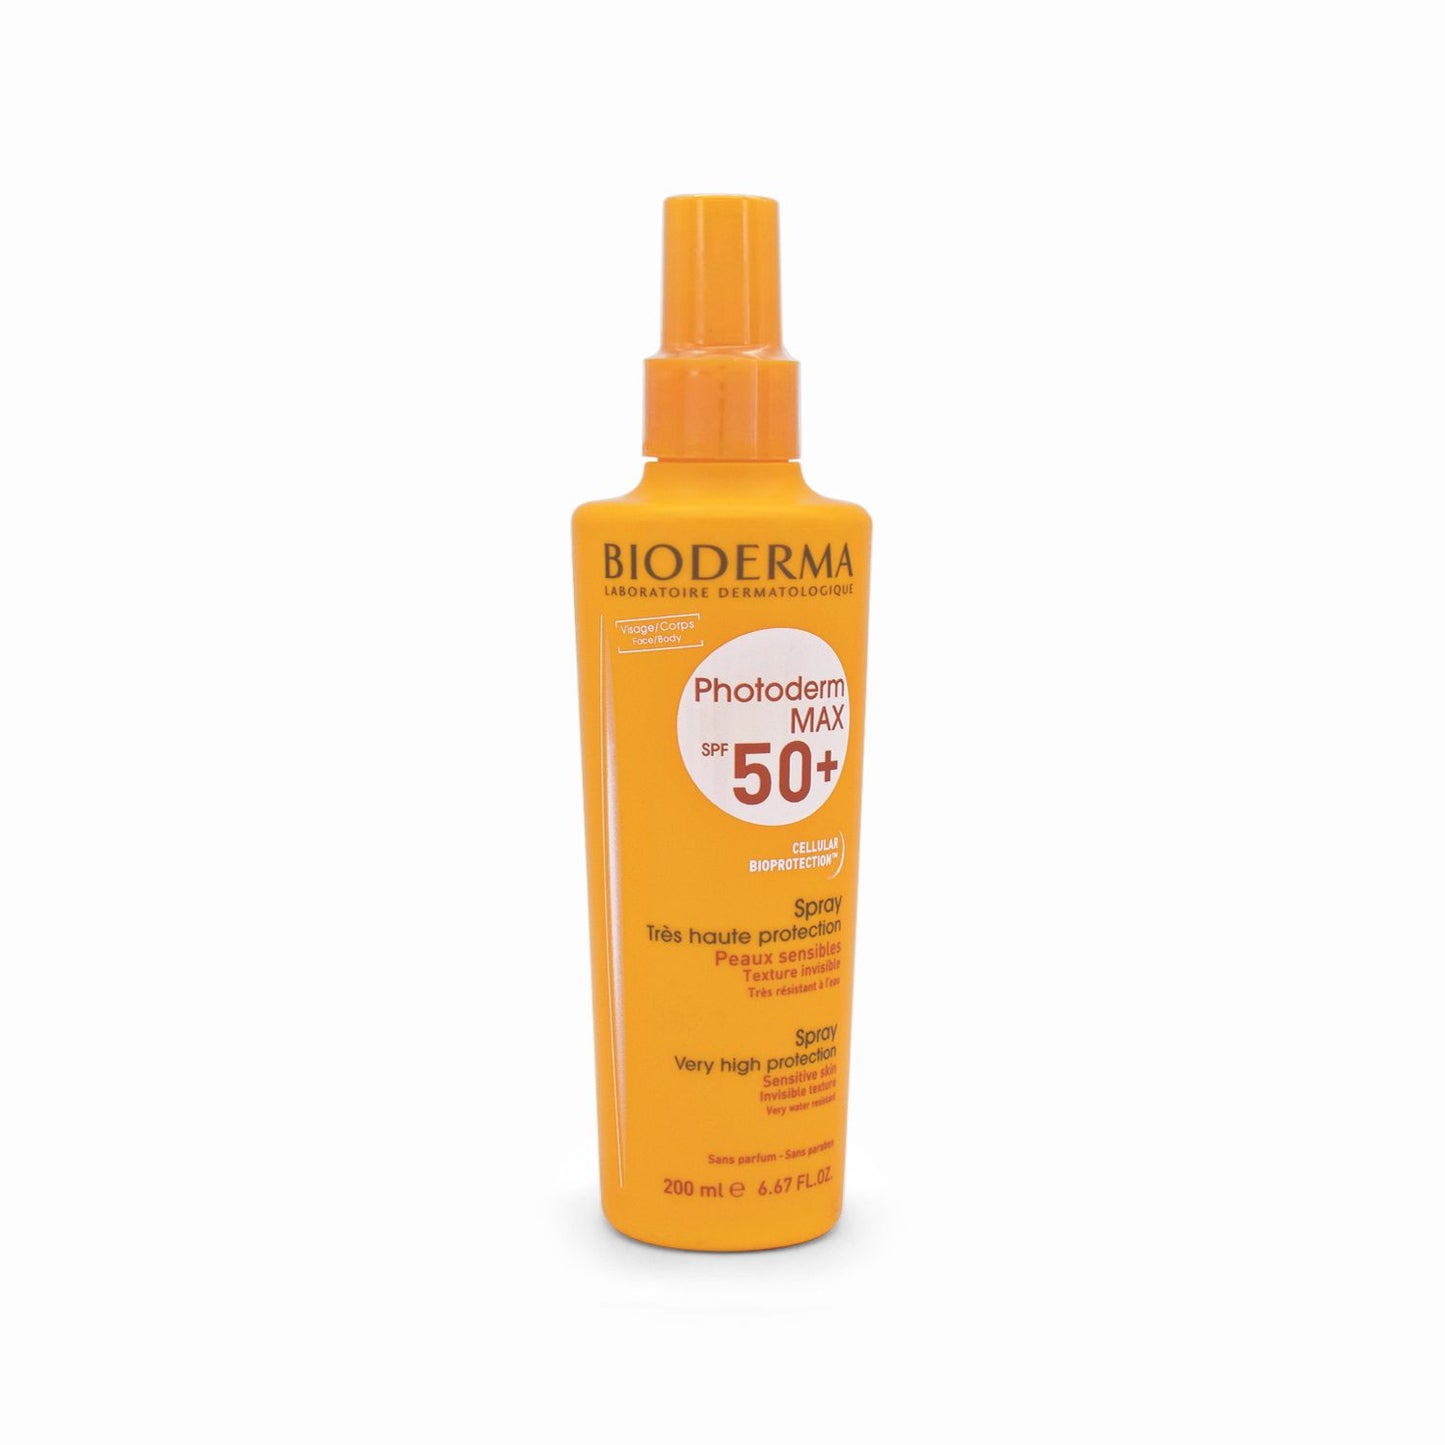 BIODERMA Photoderm MAX Sunscreen Spray SPF50+ 200ml - Imperfect Container